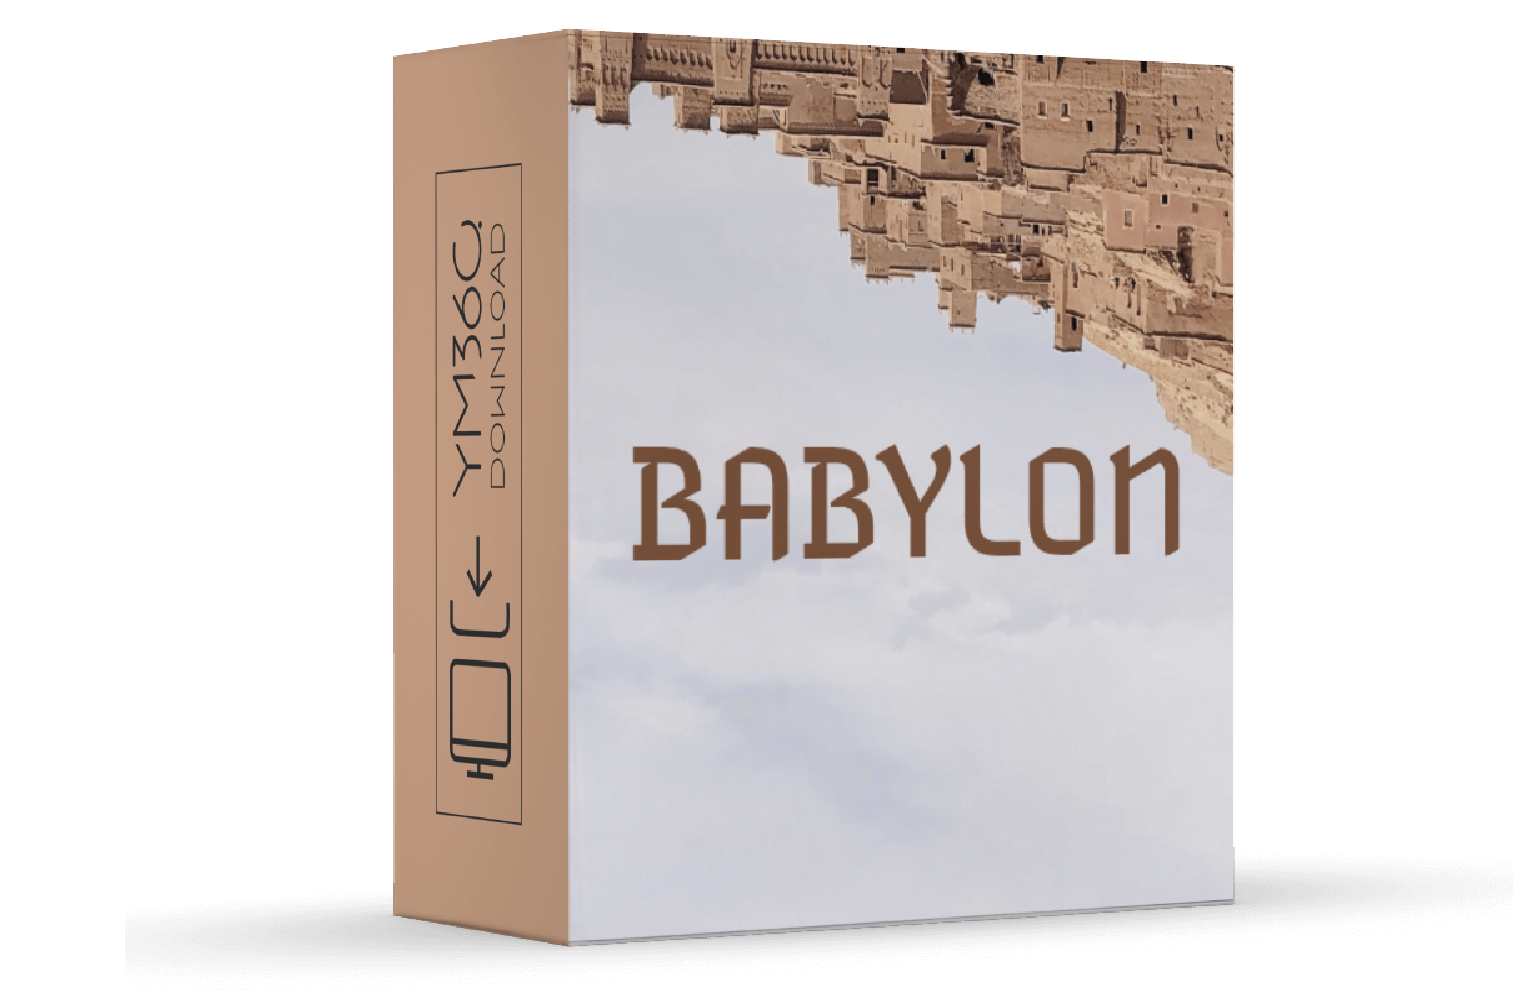 Babylon: Following Jesus In A Foreign Land